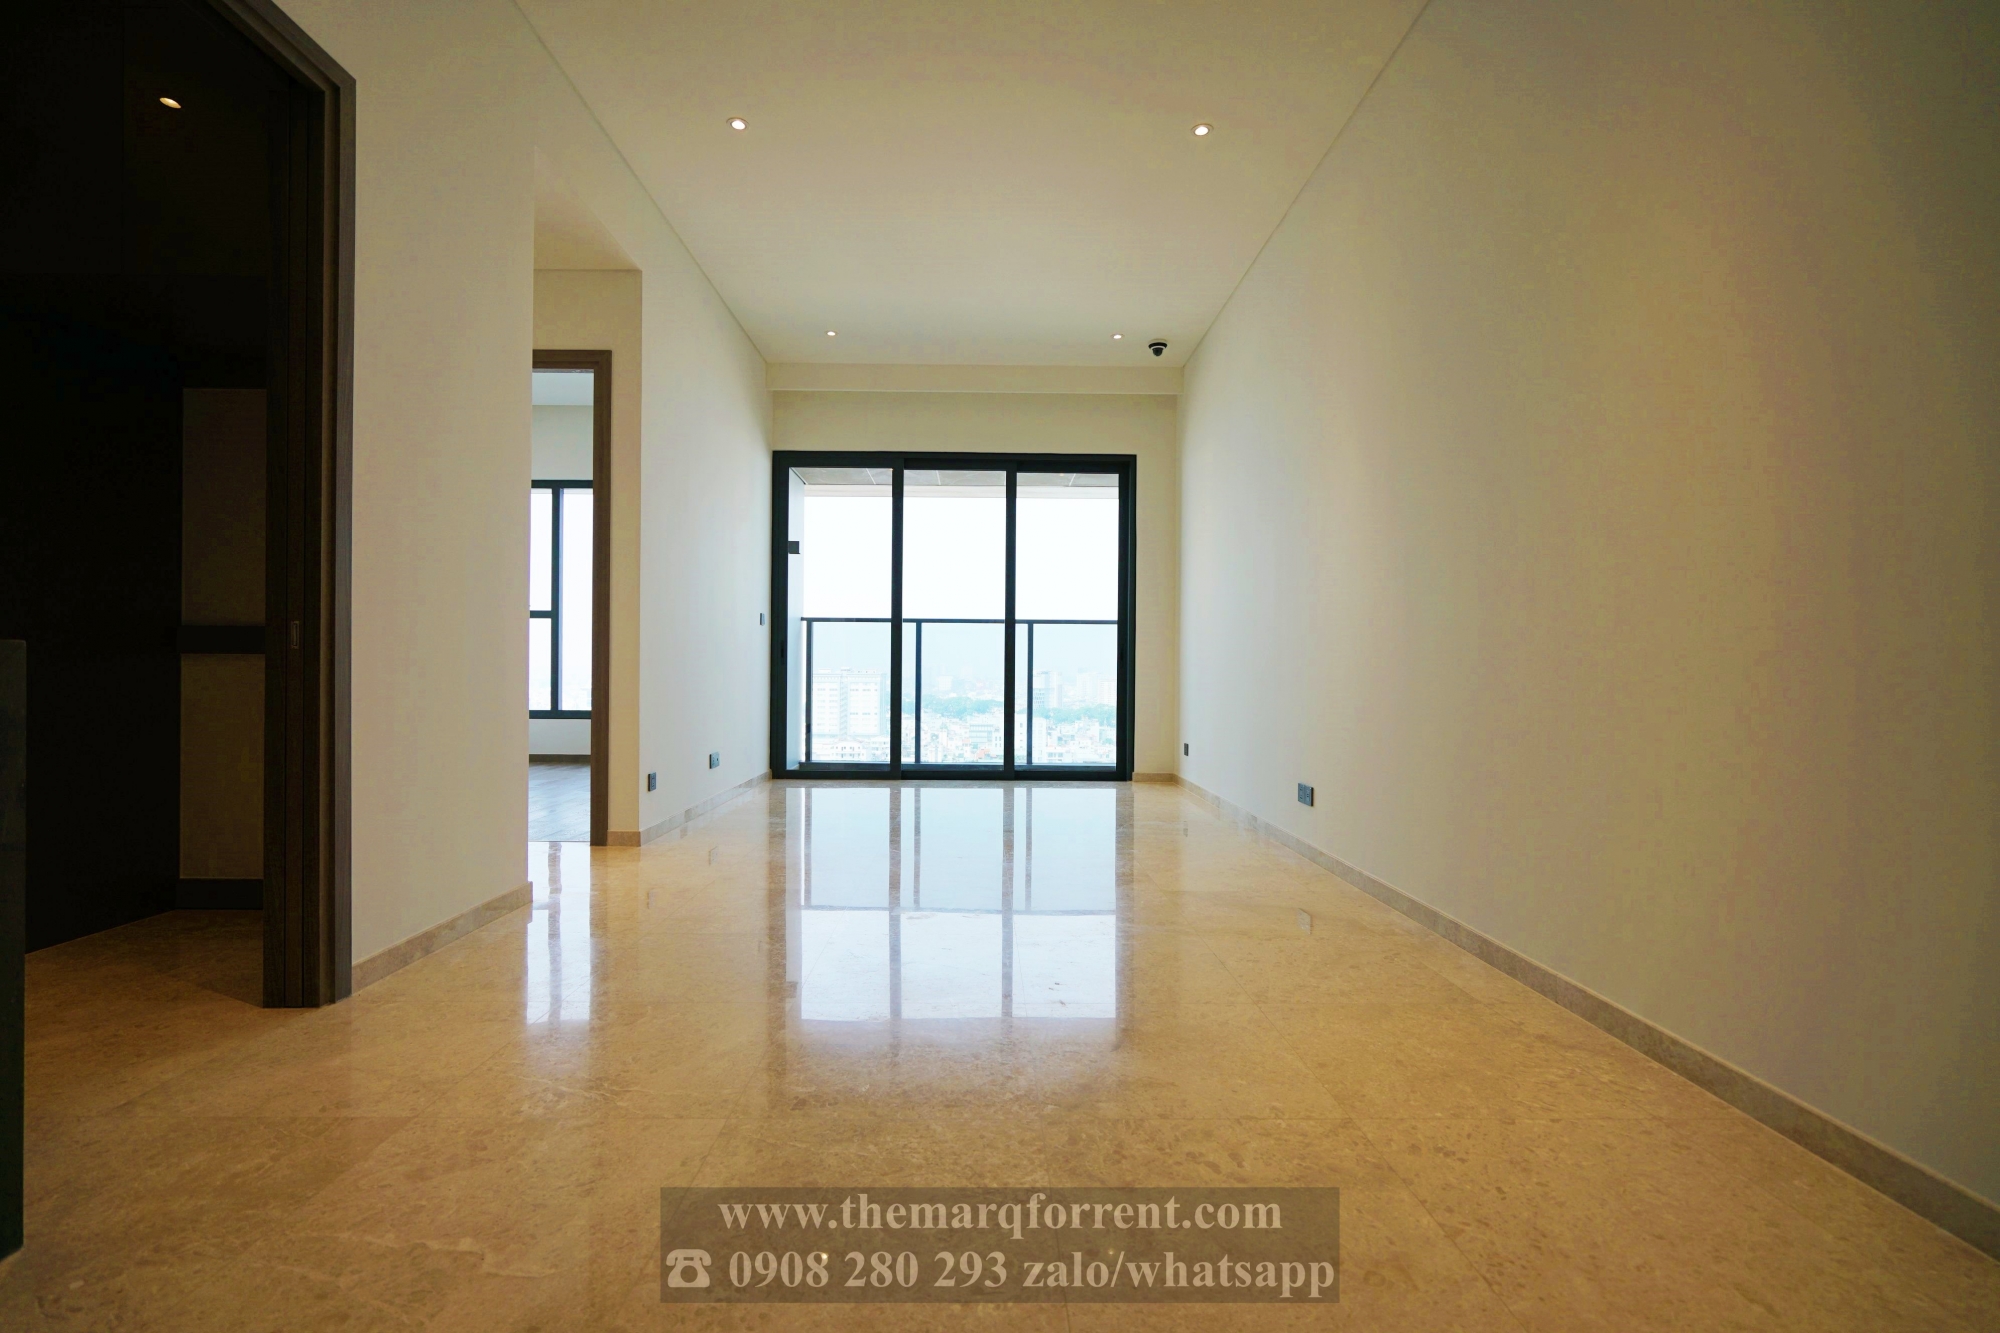 Good rental 3 bedroom apartment for rent in The Marq District 1